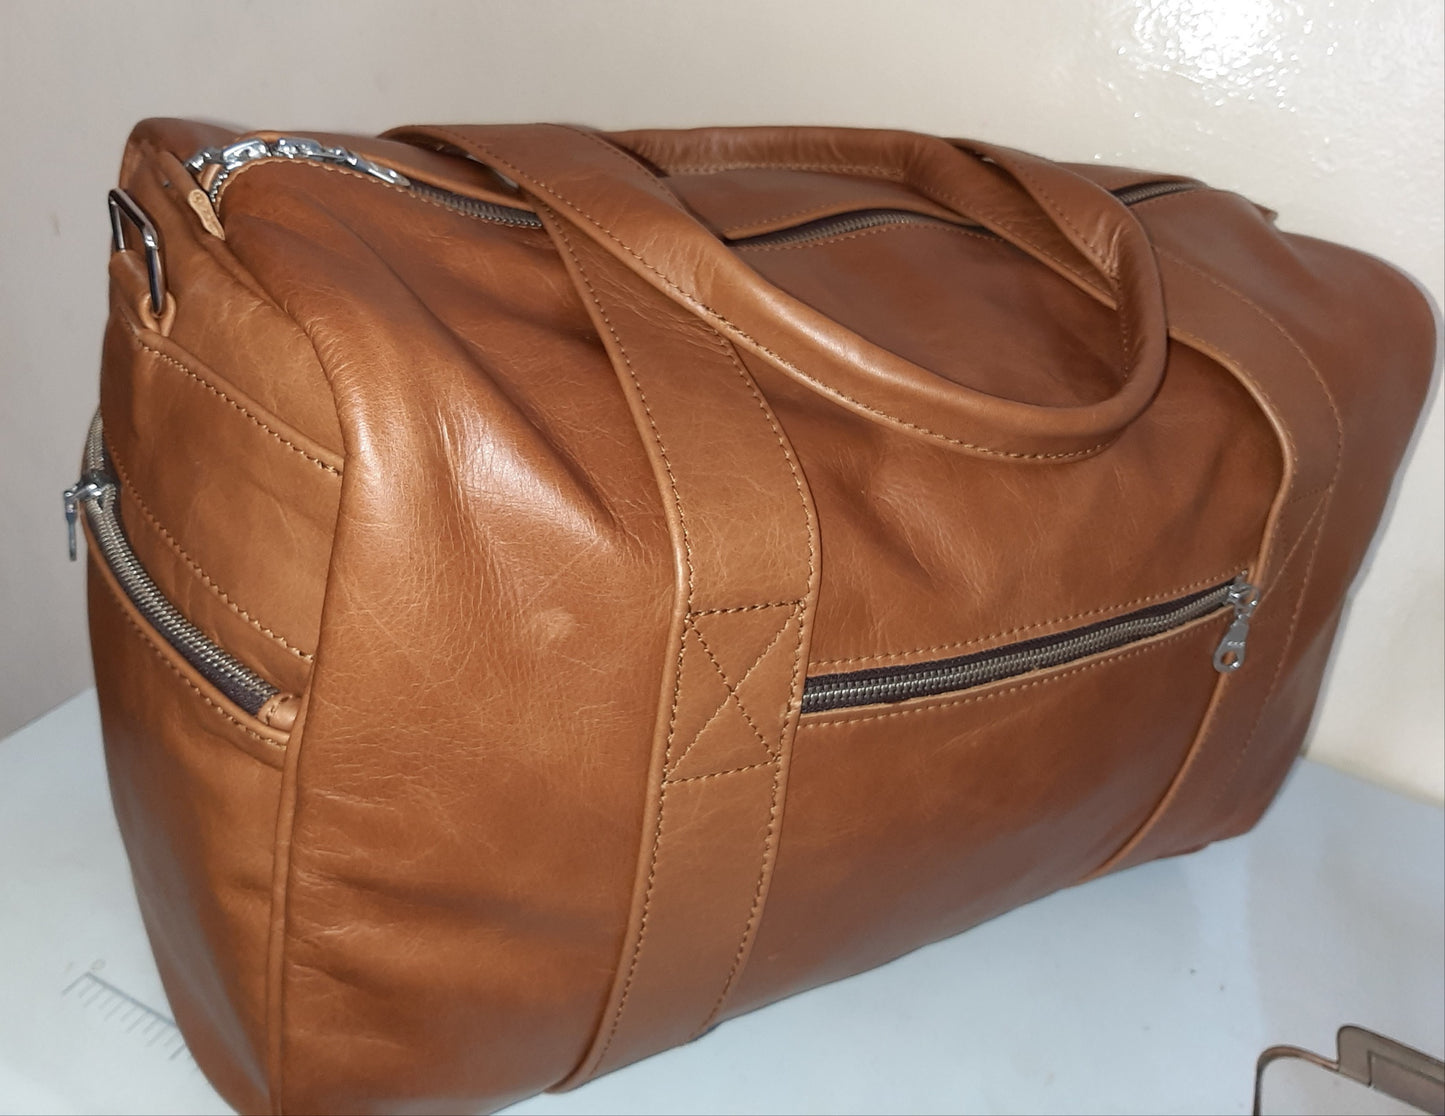 A beautiful light tan Anny Marie travel bag from Cape Masai Leather